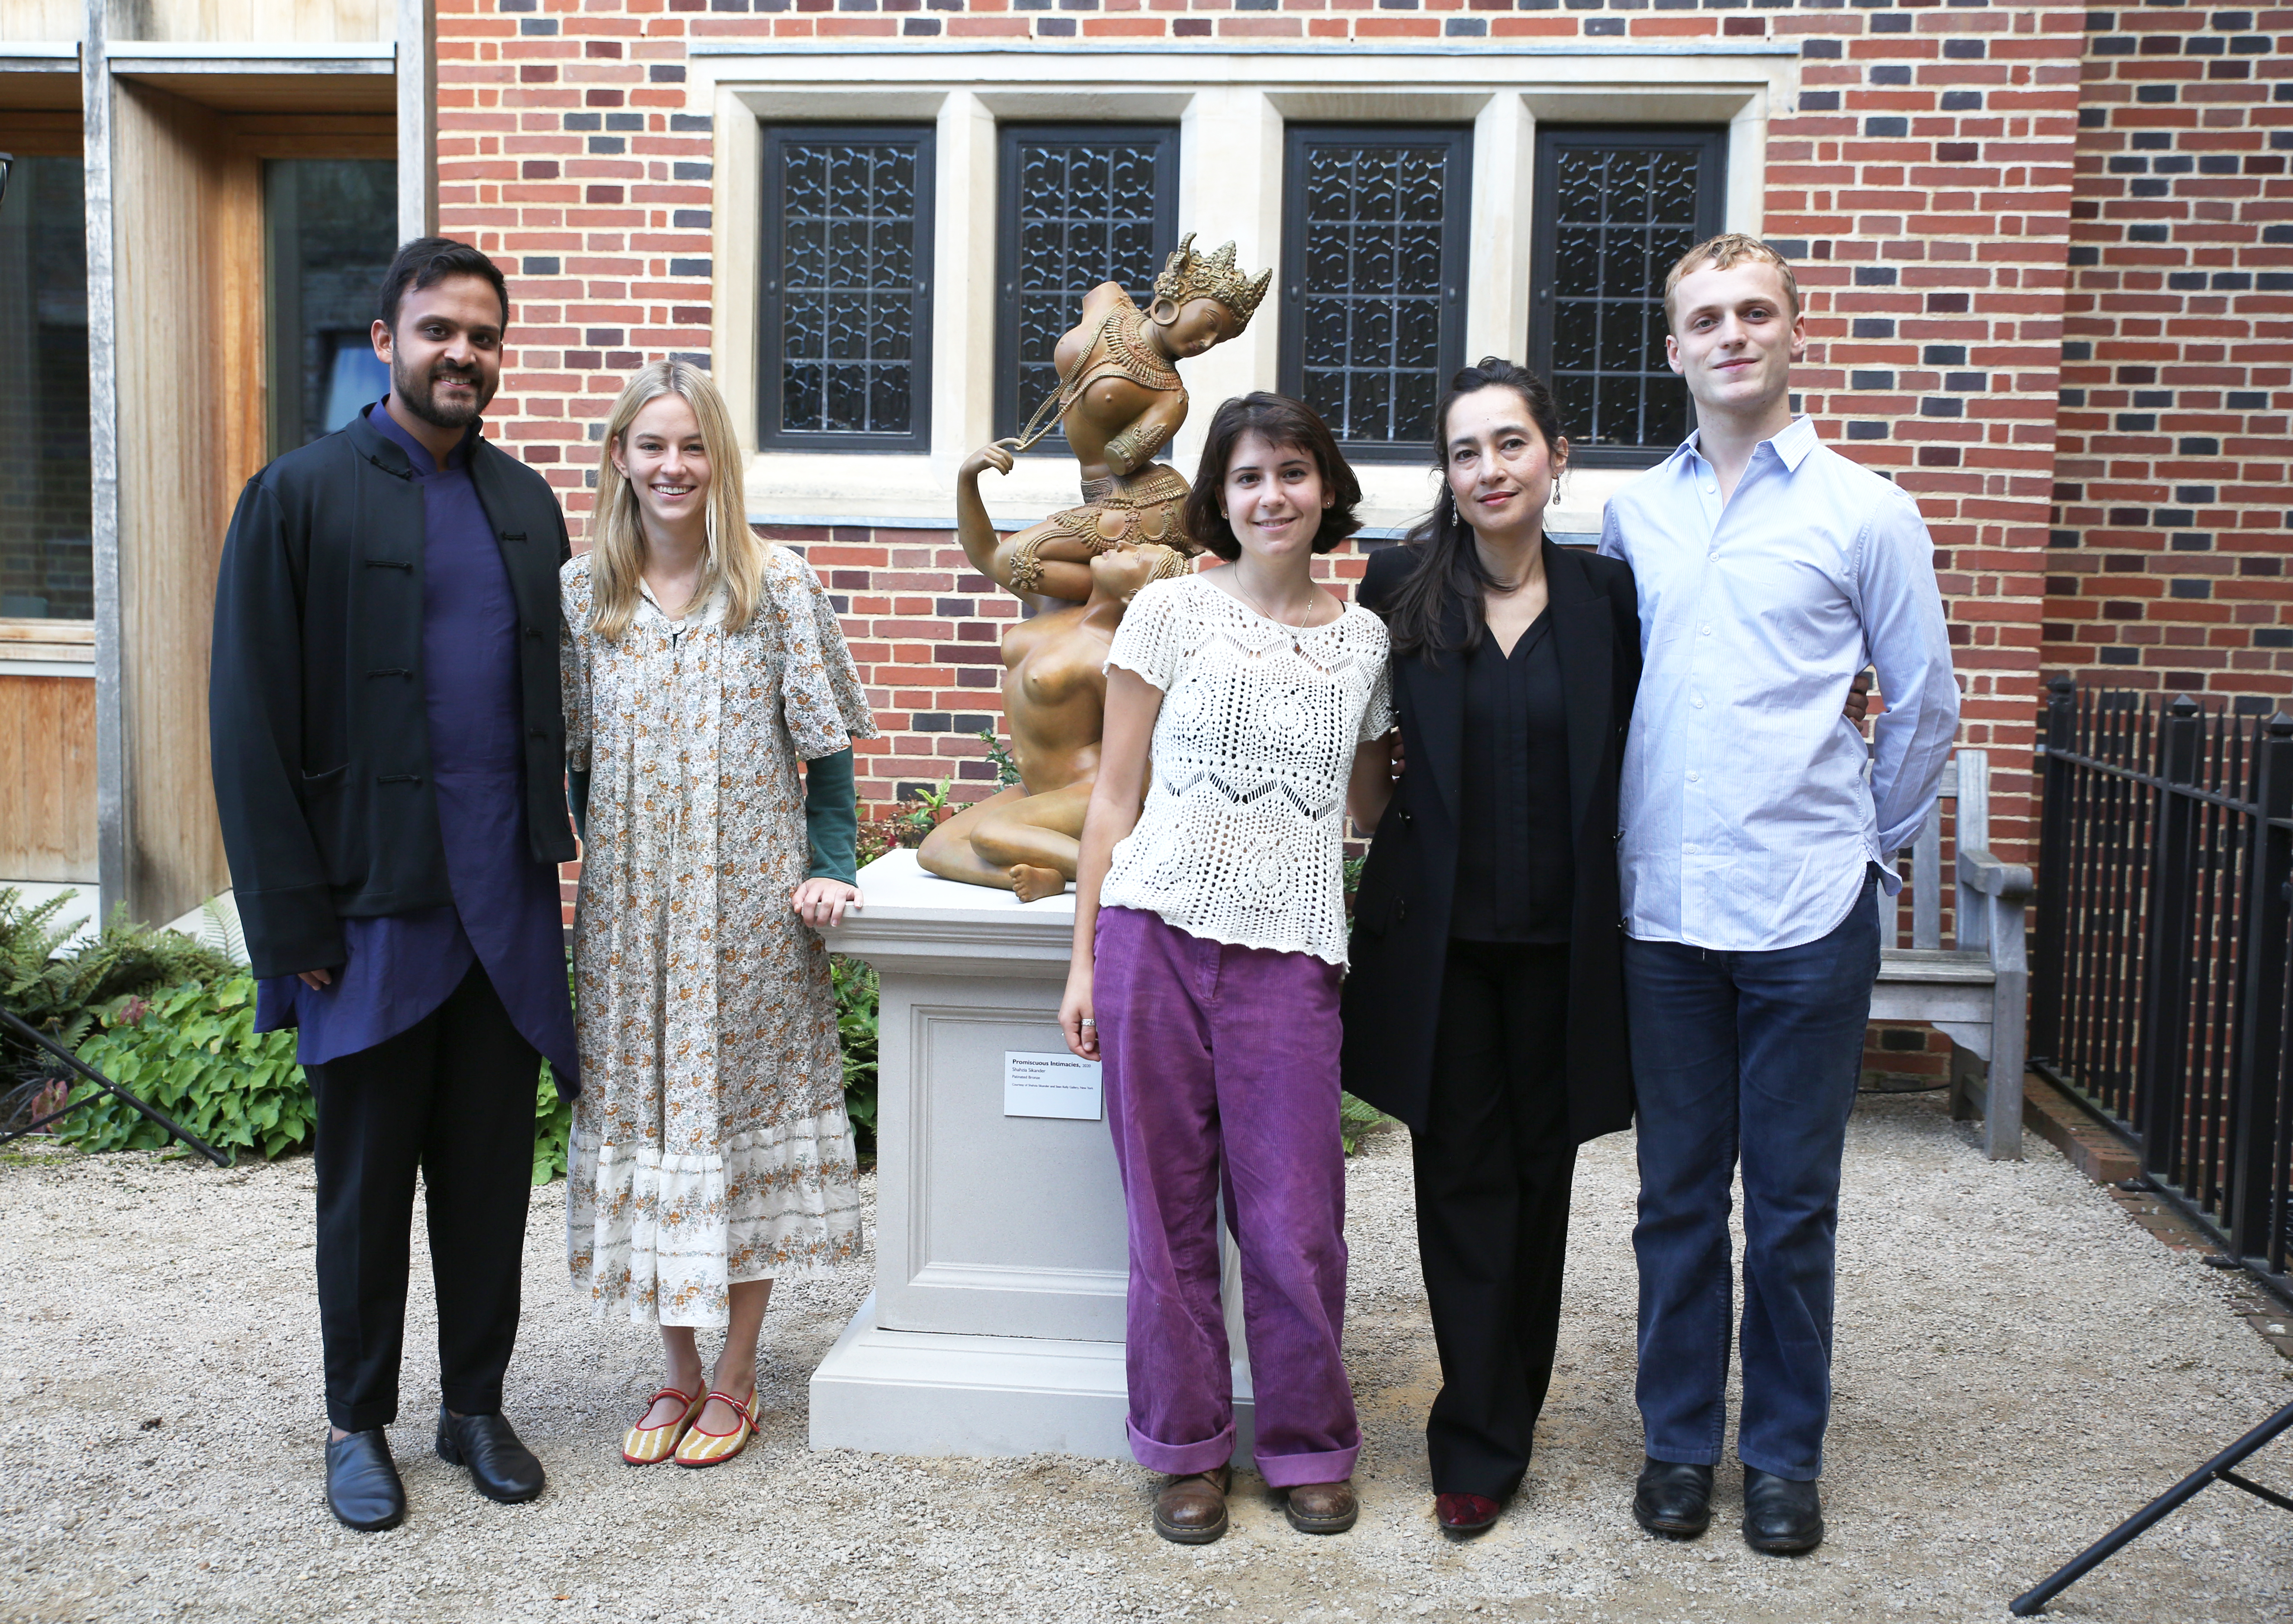 <p>The team (from L to R):<br />
Dr Vivek Gupta (Curator)<br />
Emily Duckworth (student curator)<br />
Zoe Turov (student curator)<br />
Shahzia Sikander (the artist)<br />
Giacomo Prideaux (student curator)</p>
